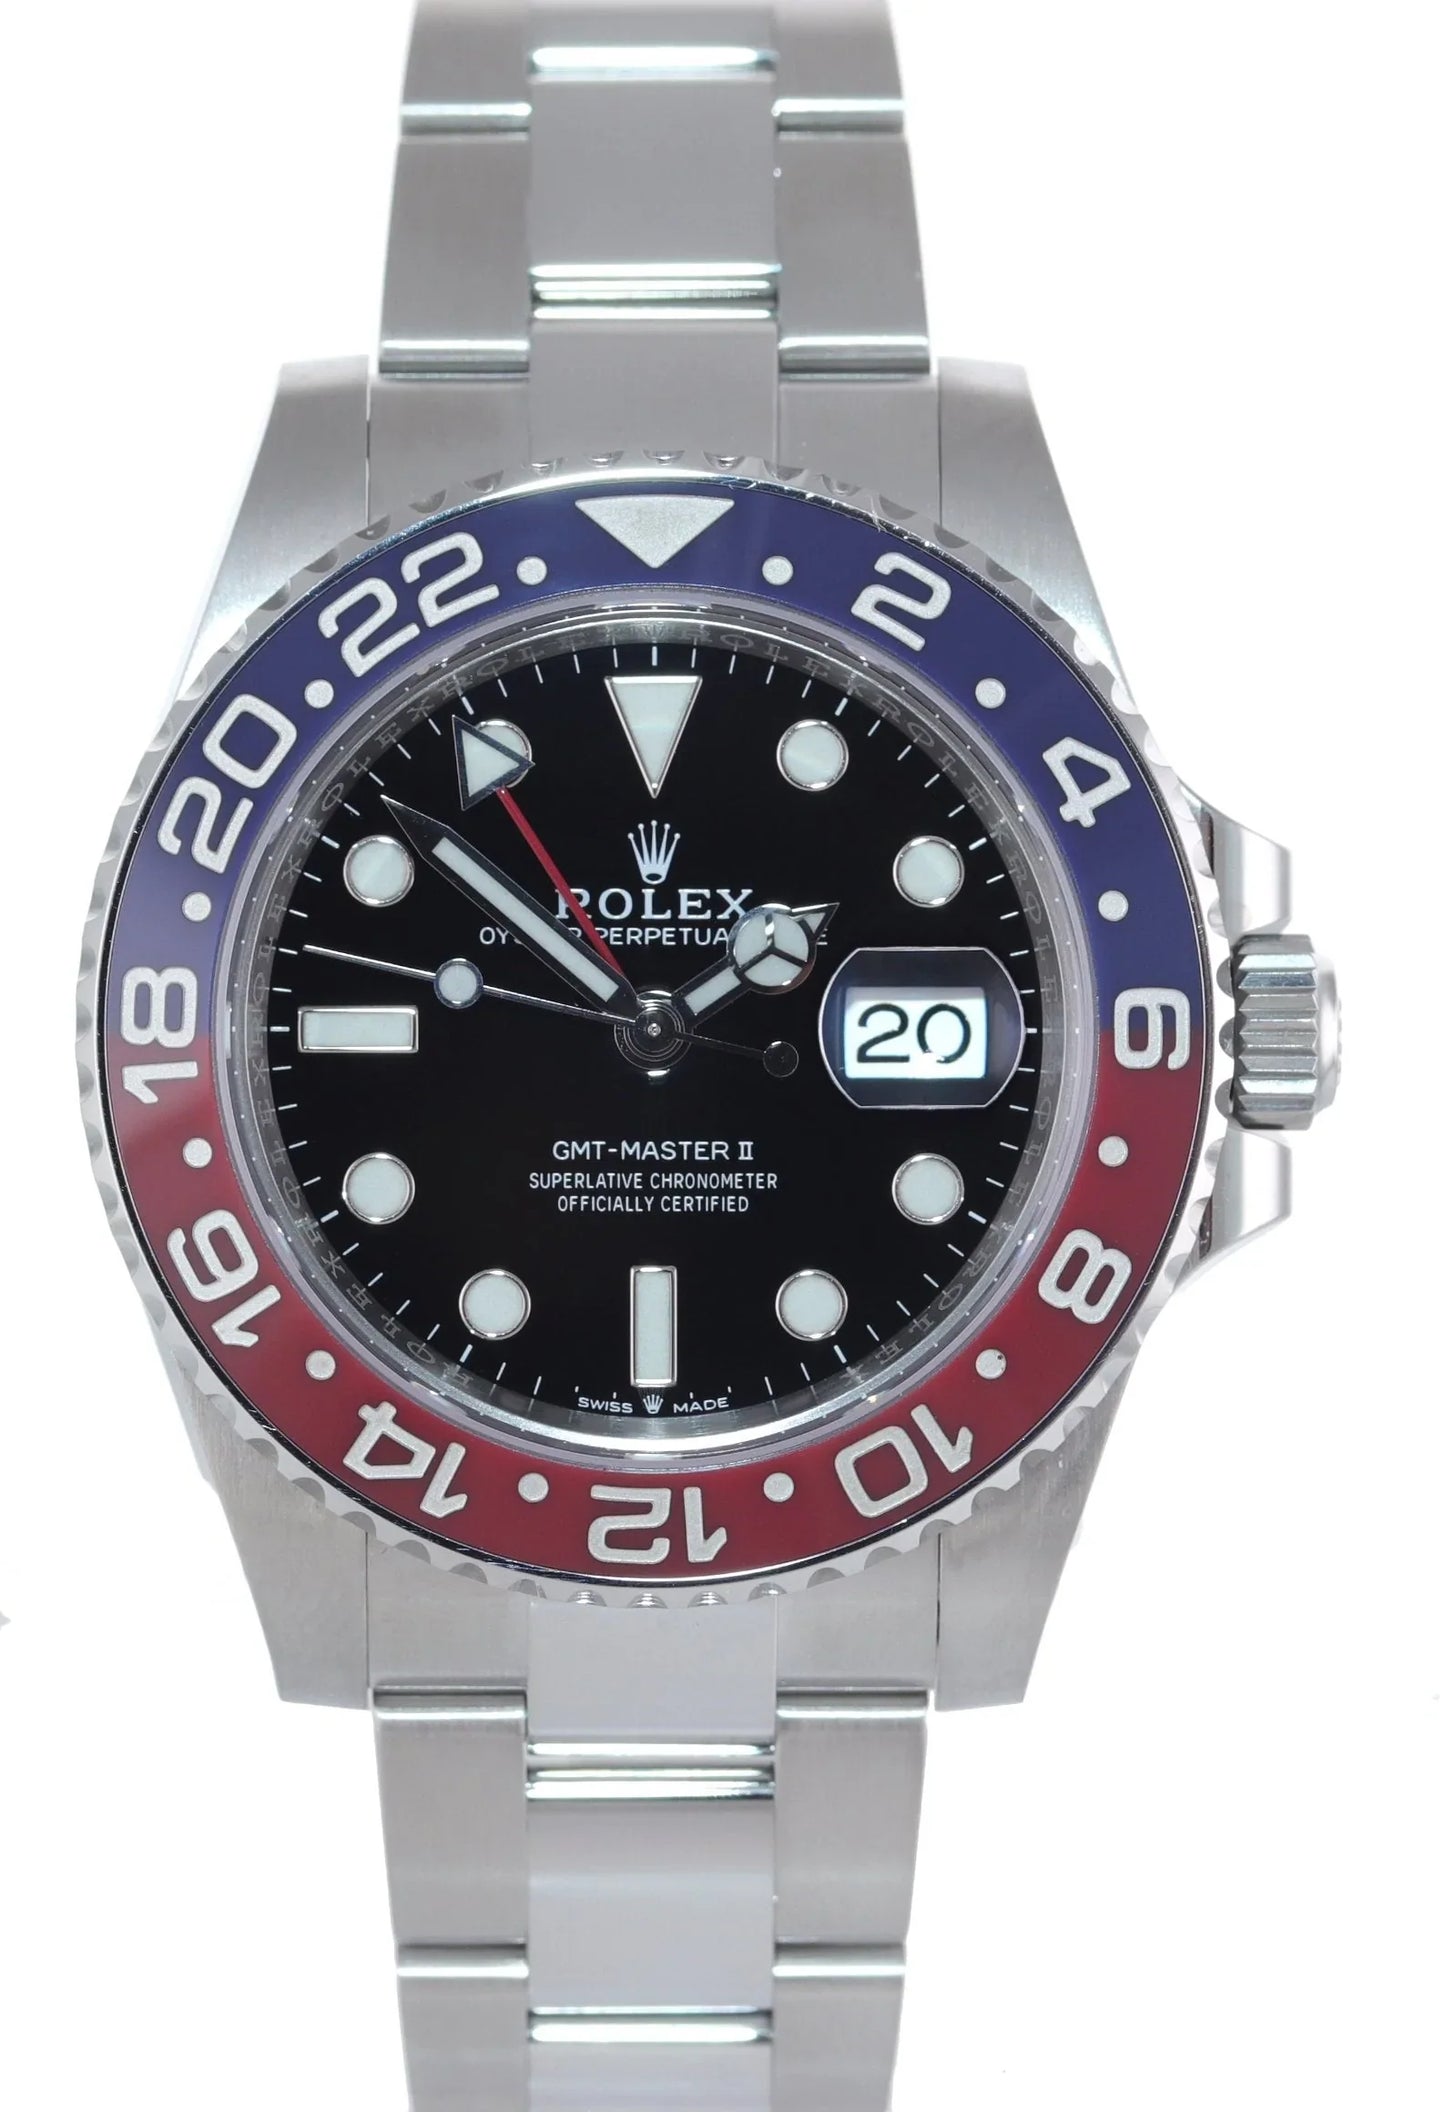 NEW 2021 PAPERS Rolex 126710 BLRO GMT Master 2 II PEPSI Blue Ceramic Oyster Watch